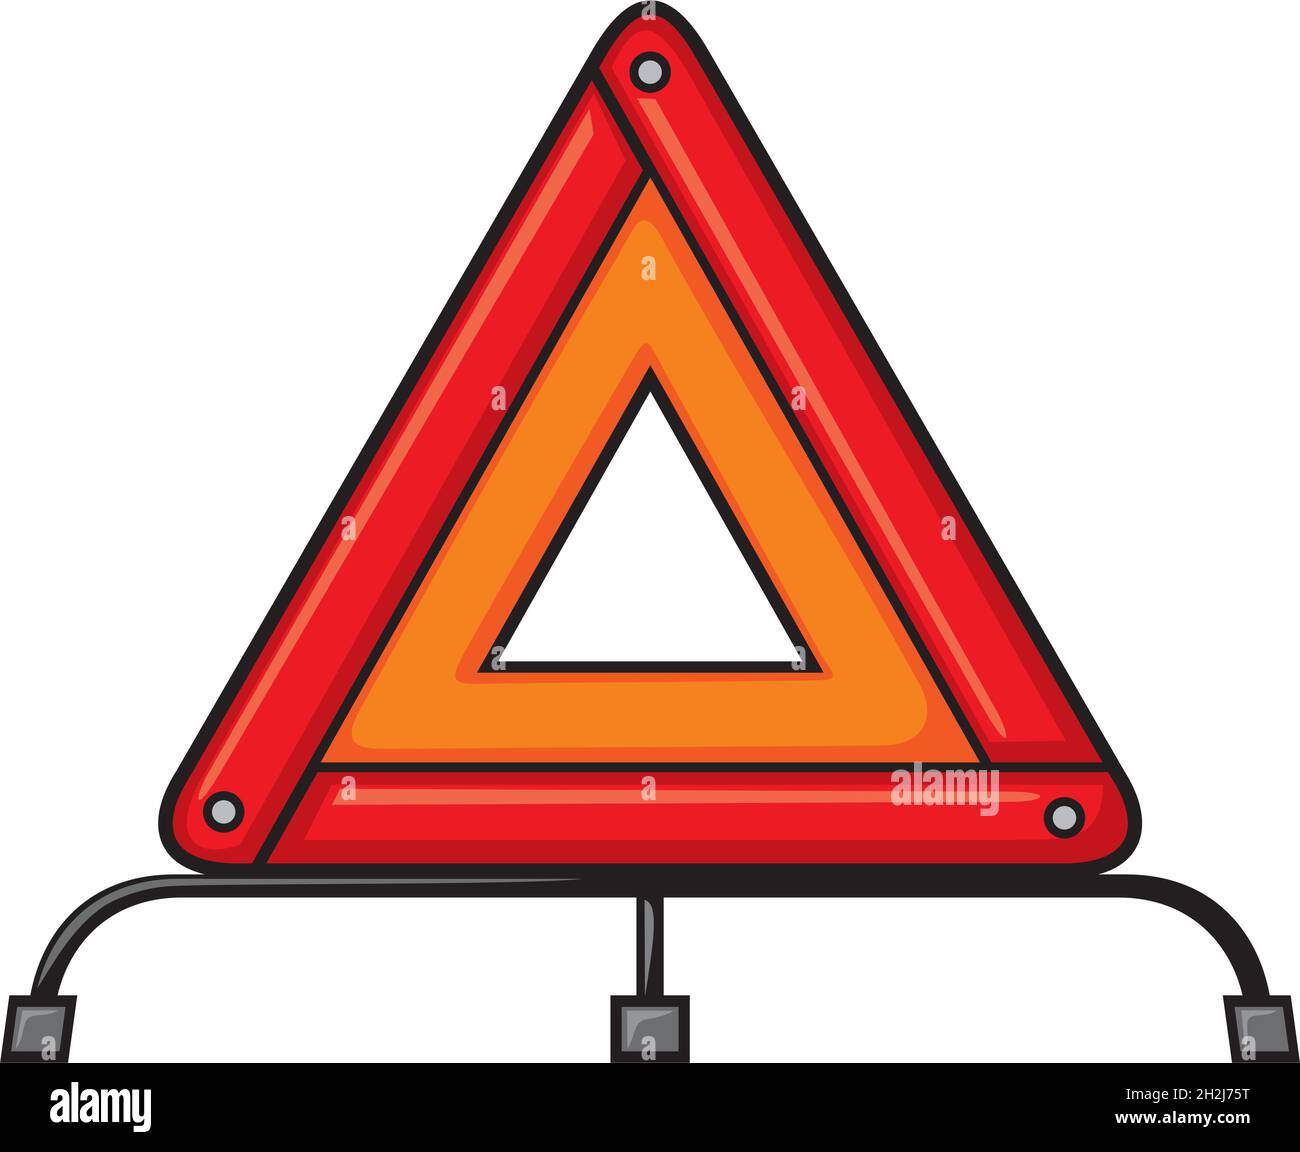 Red warning triangle emergency road sign vector illustration Stock Vector